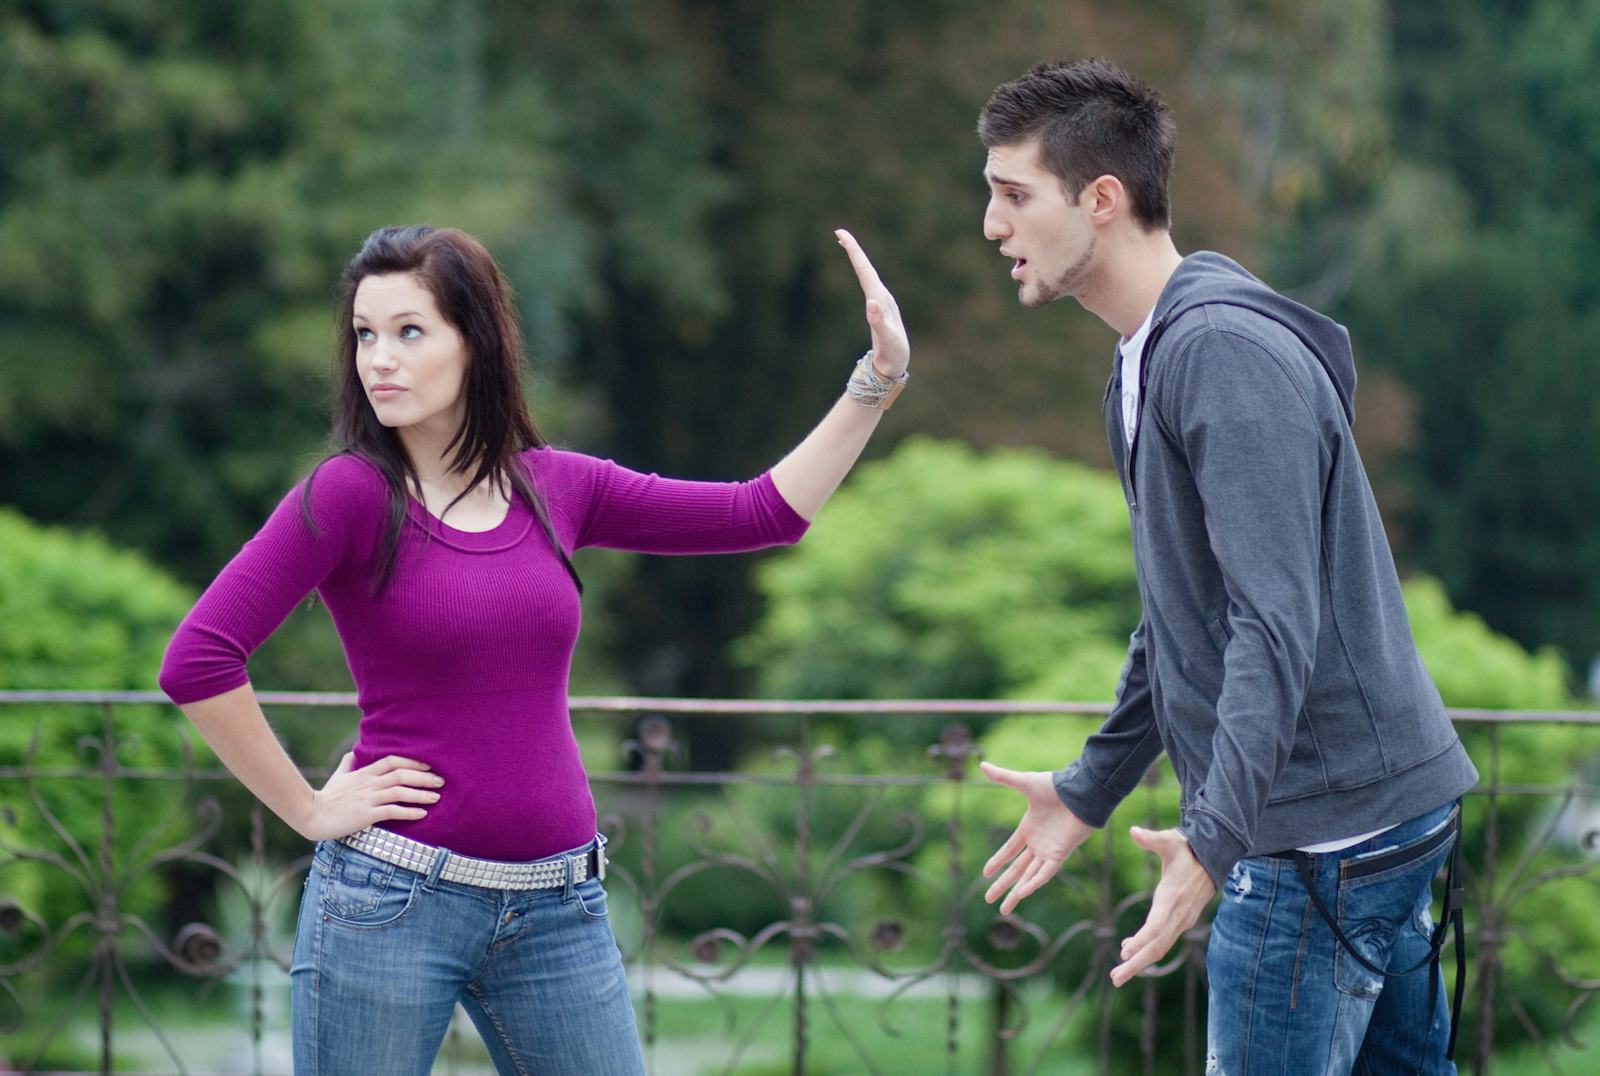 9 Things To Never Say To Your Significant Other